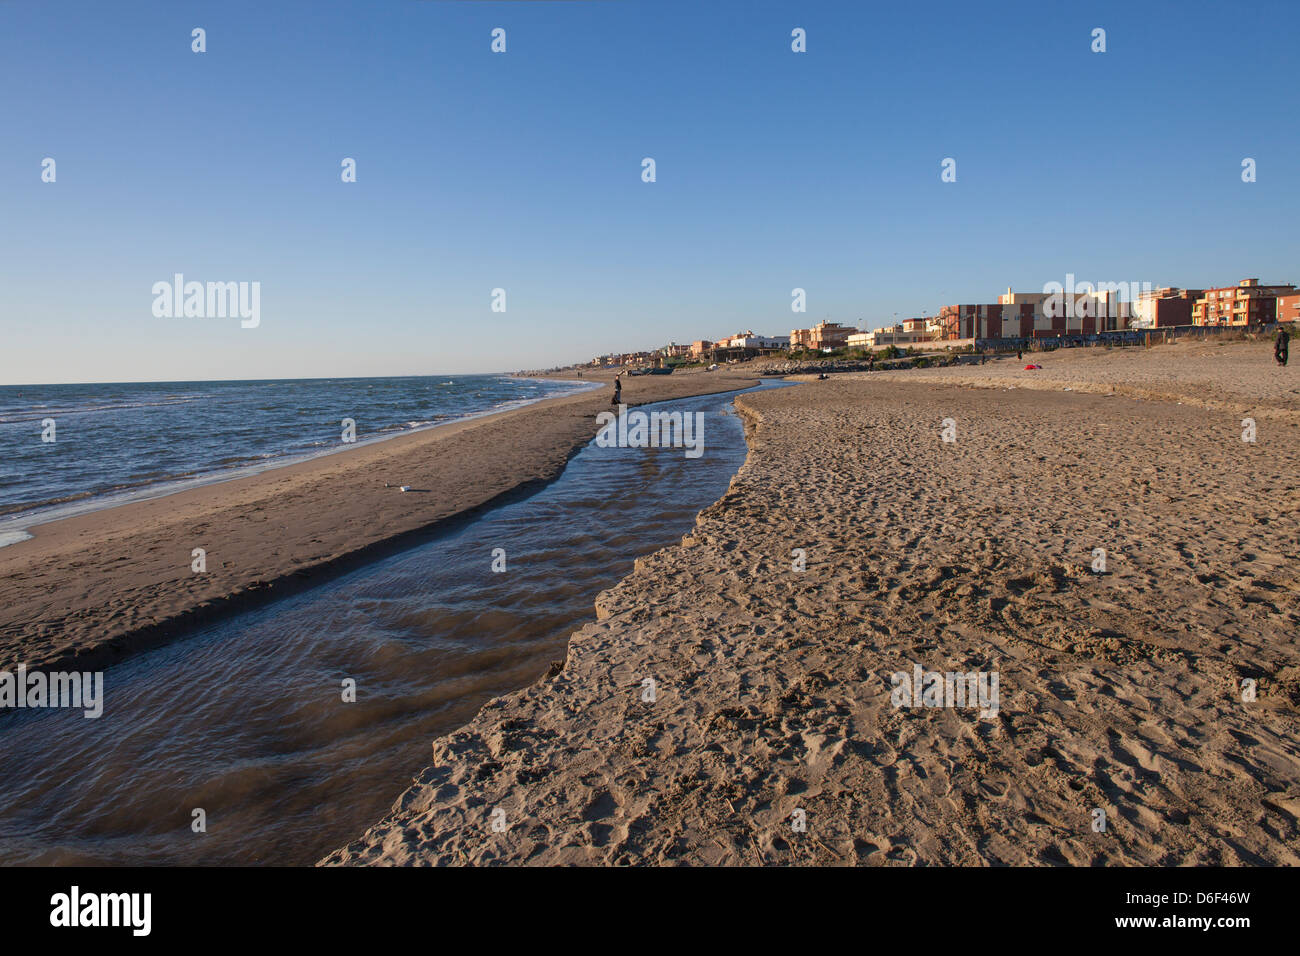 water channel on the beach in winter, Stock Photo